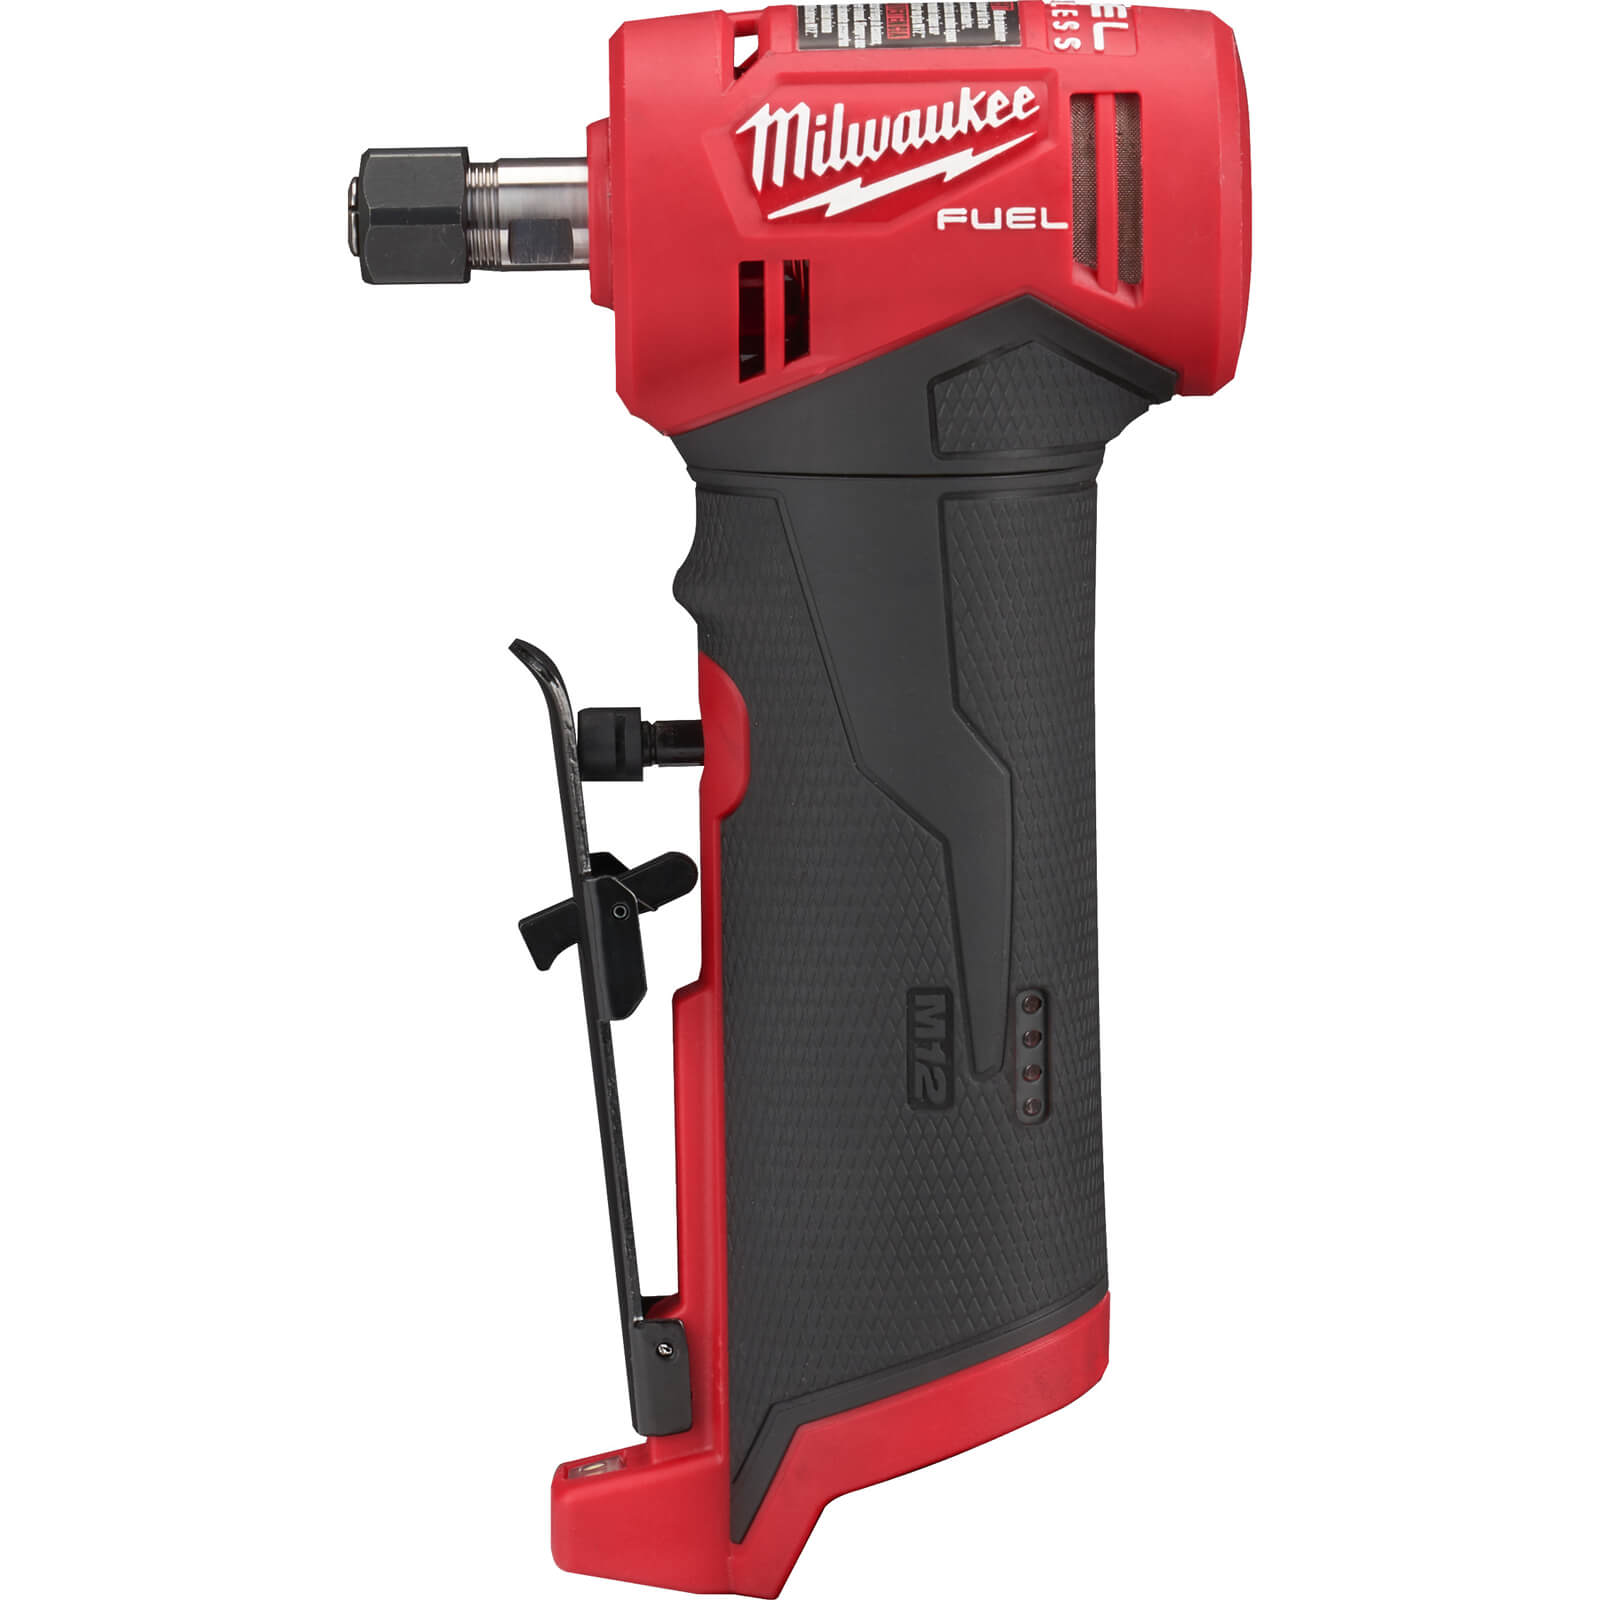 Milwaukee M12 FDGA Fuel 12v Cordless Brushless Angled Die Grinder No Batteries No Charger No Case